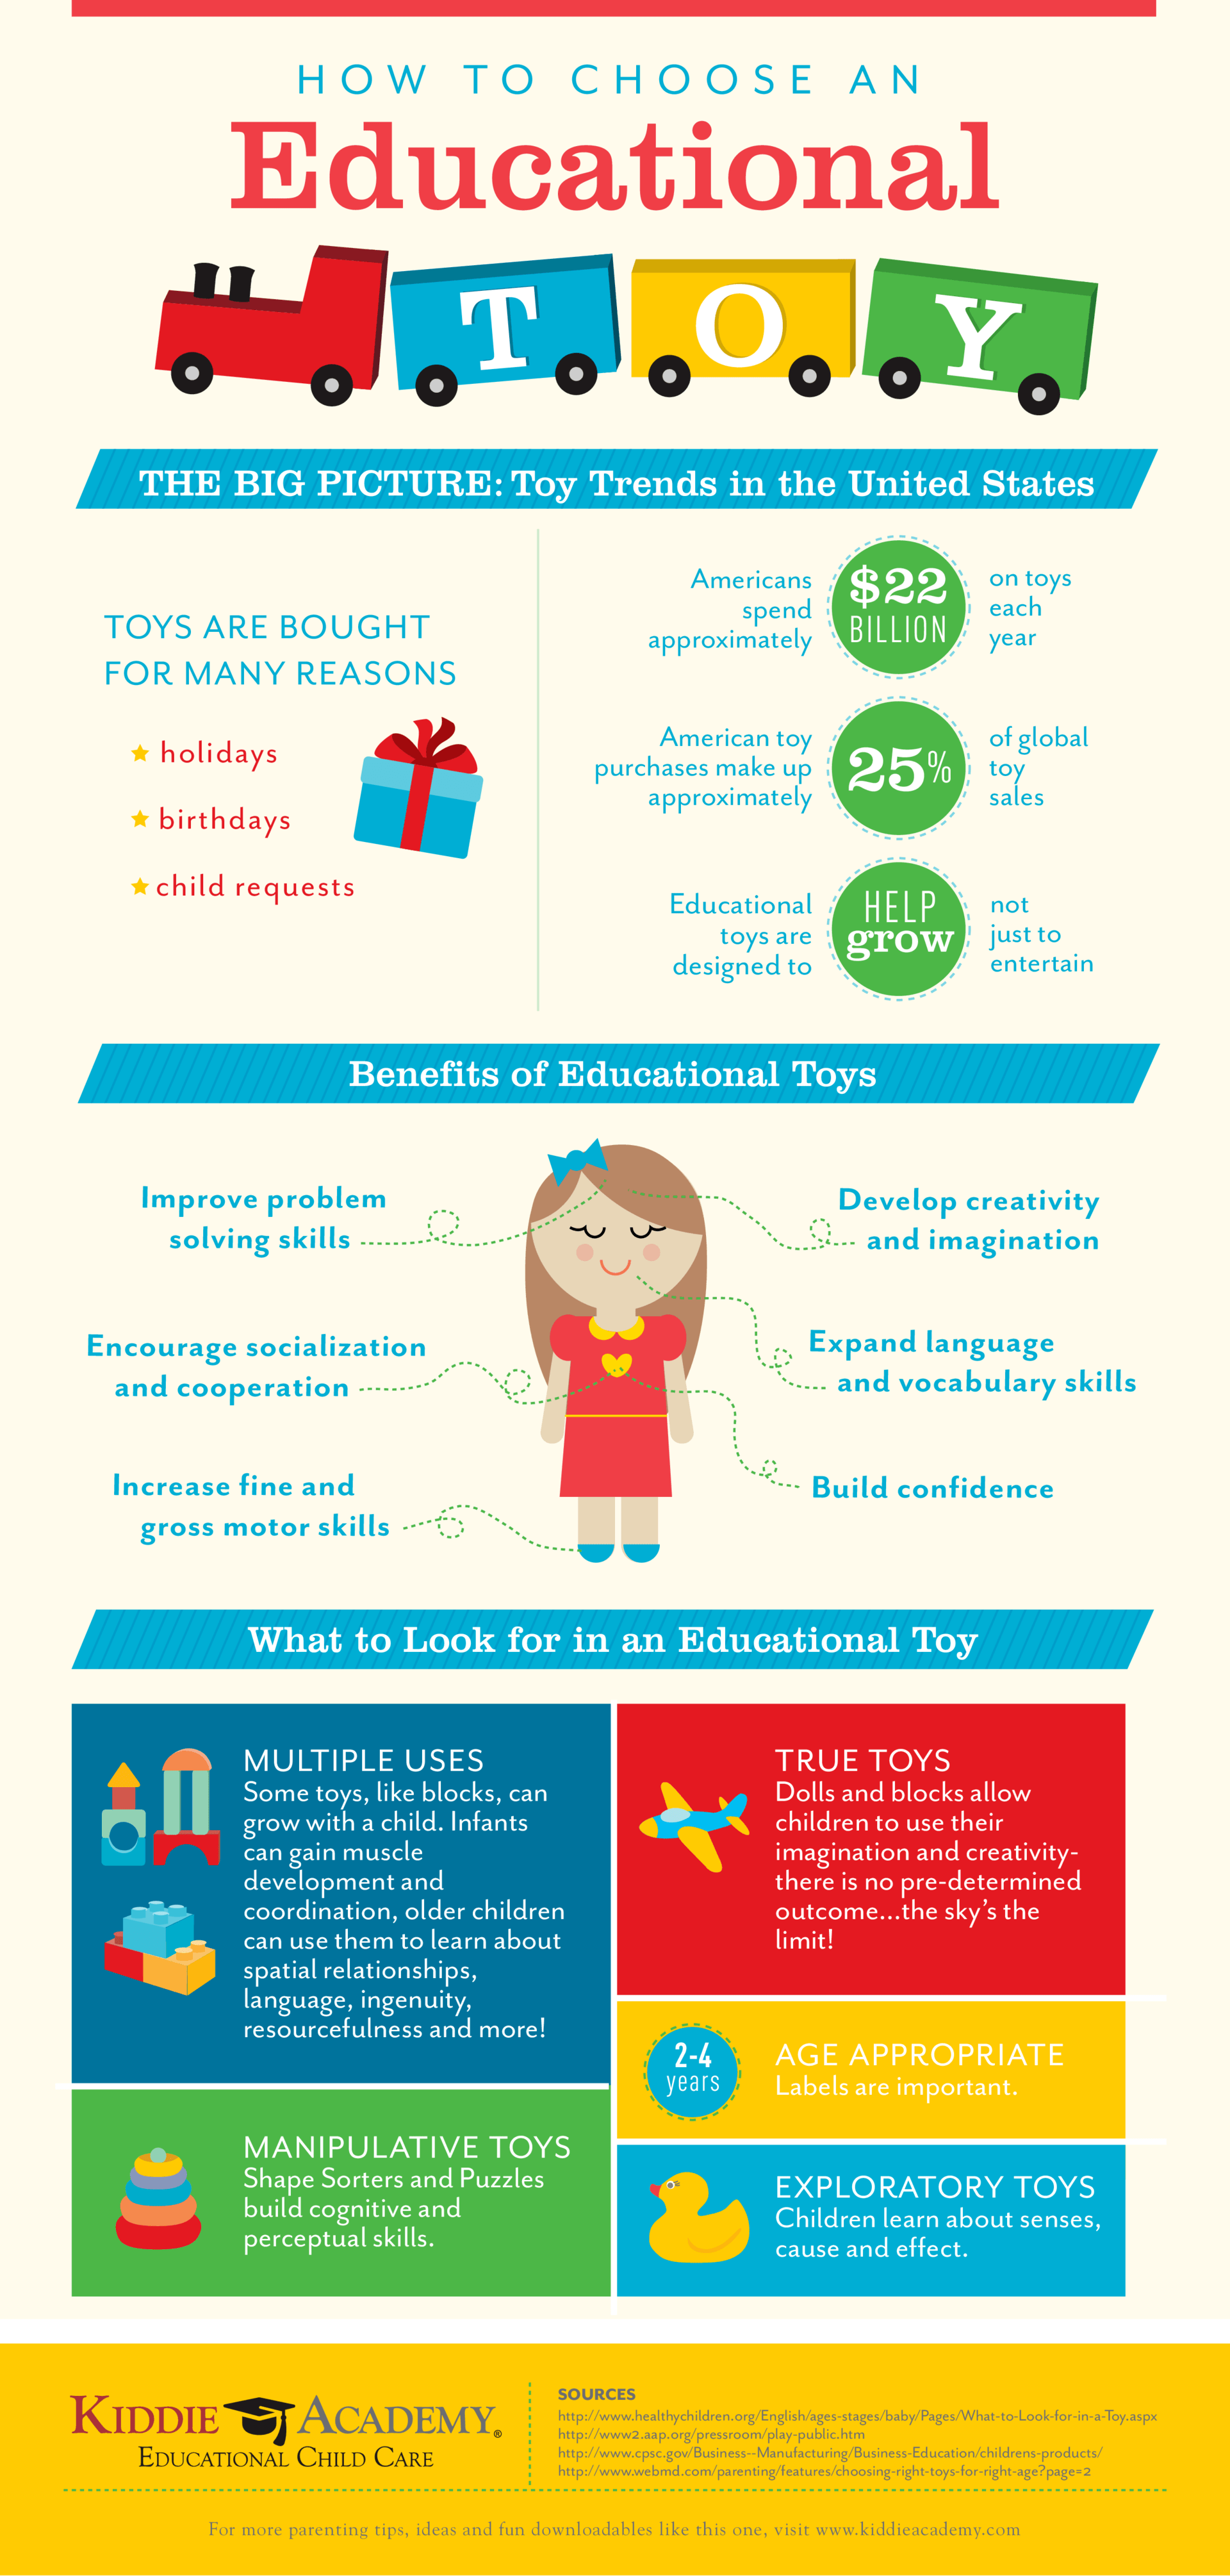 building tools infographic for kids